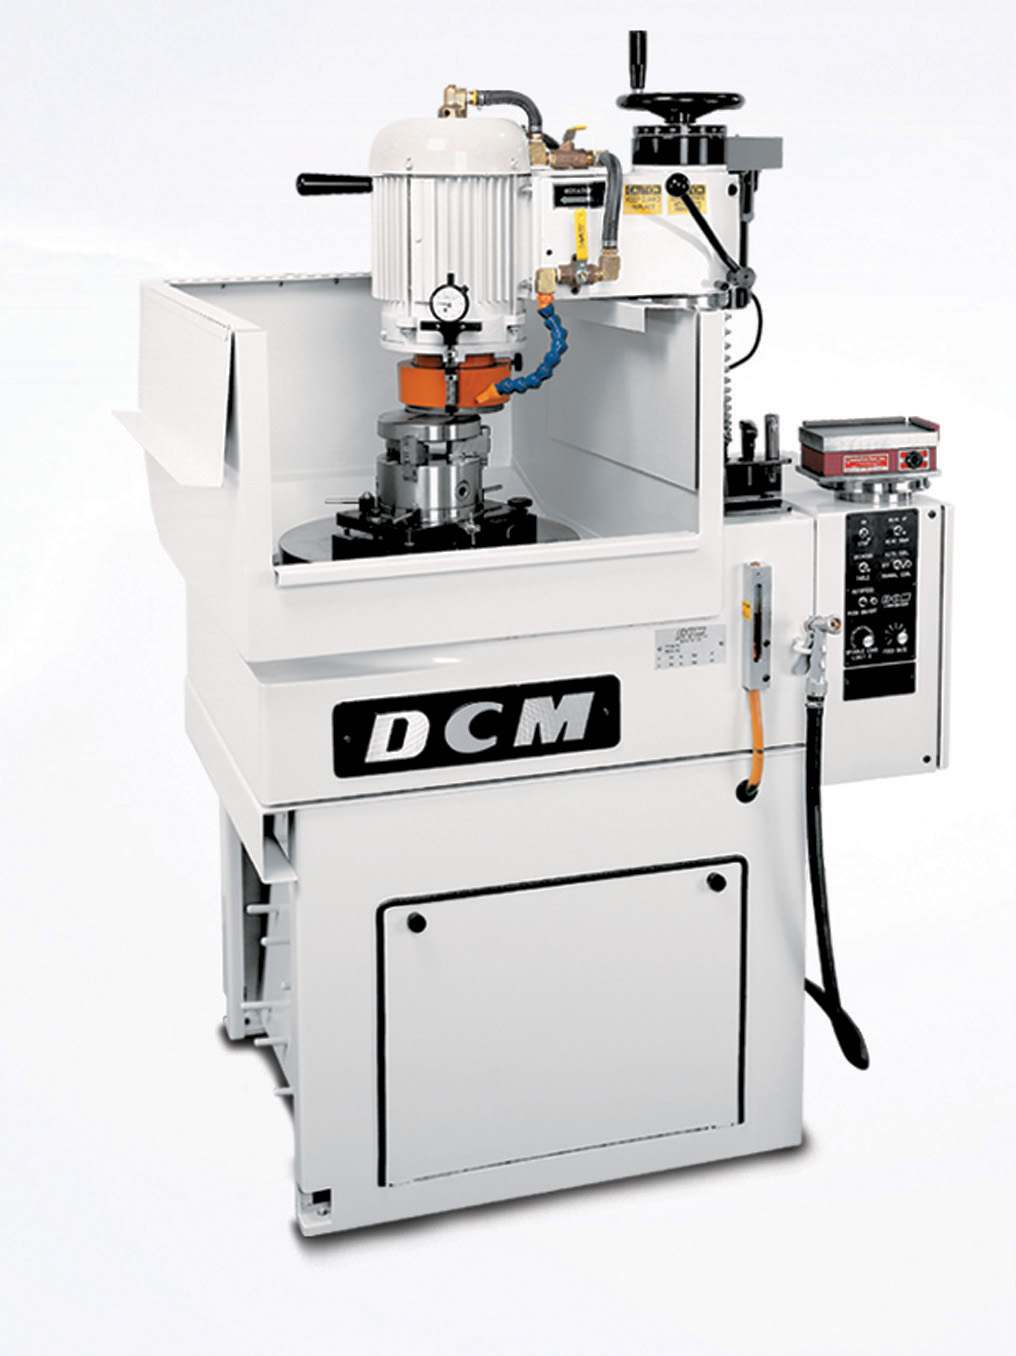 DCM DPG with full enclosure option for online